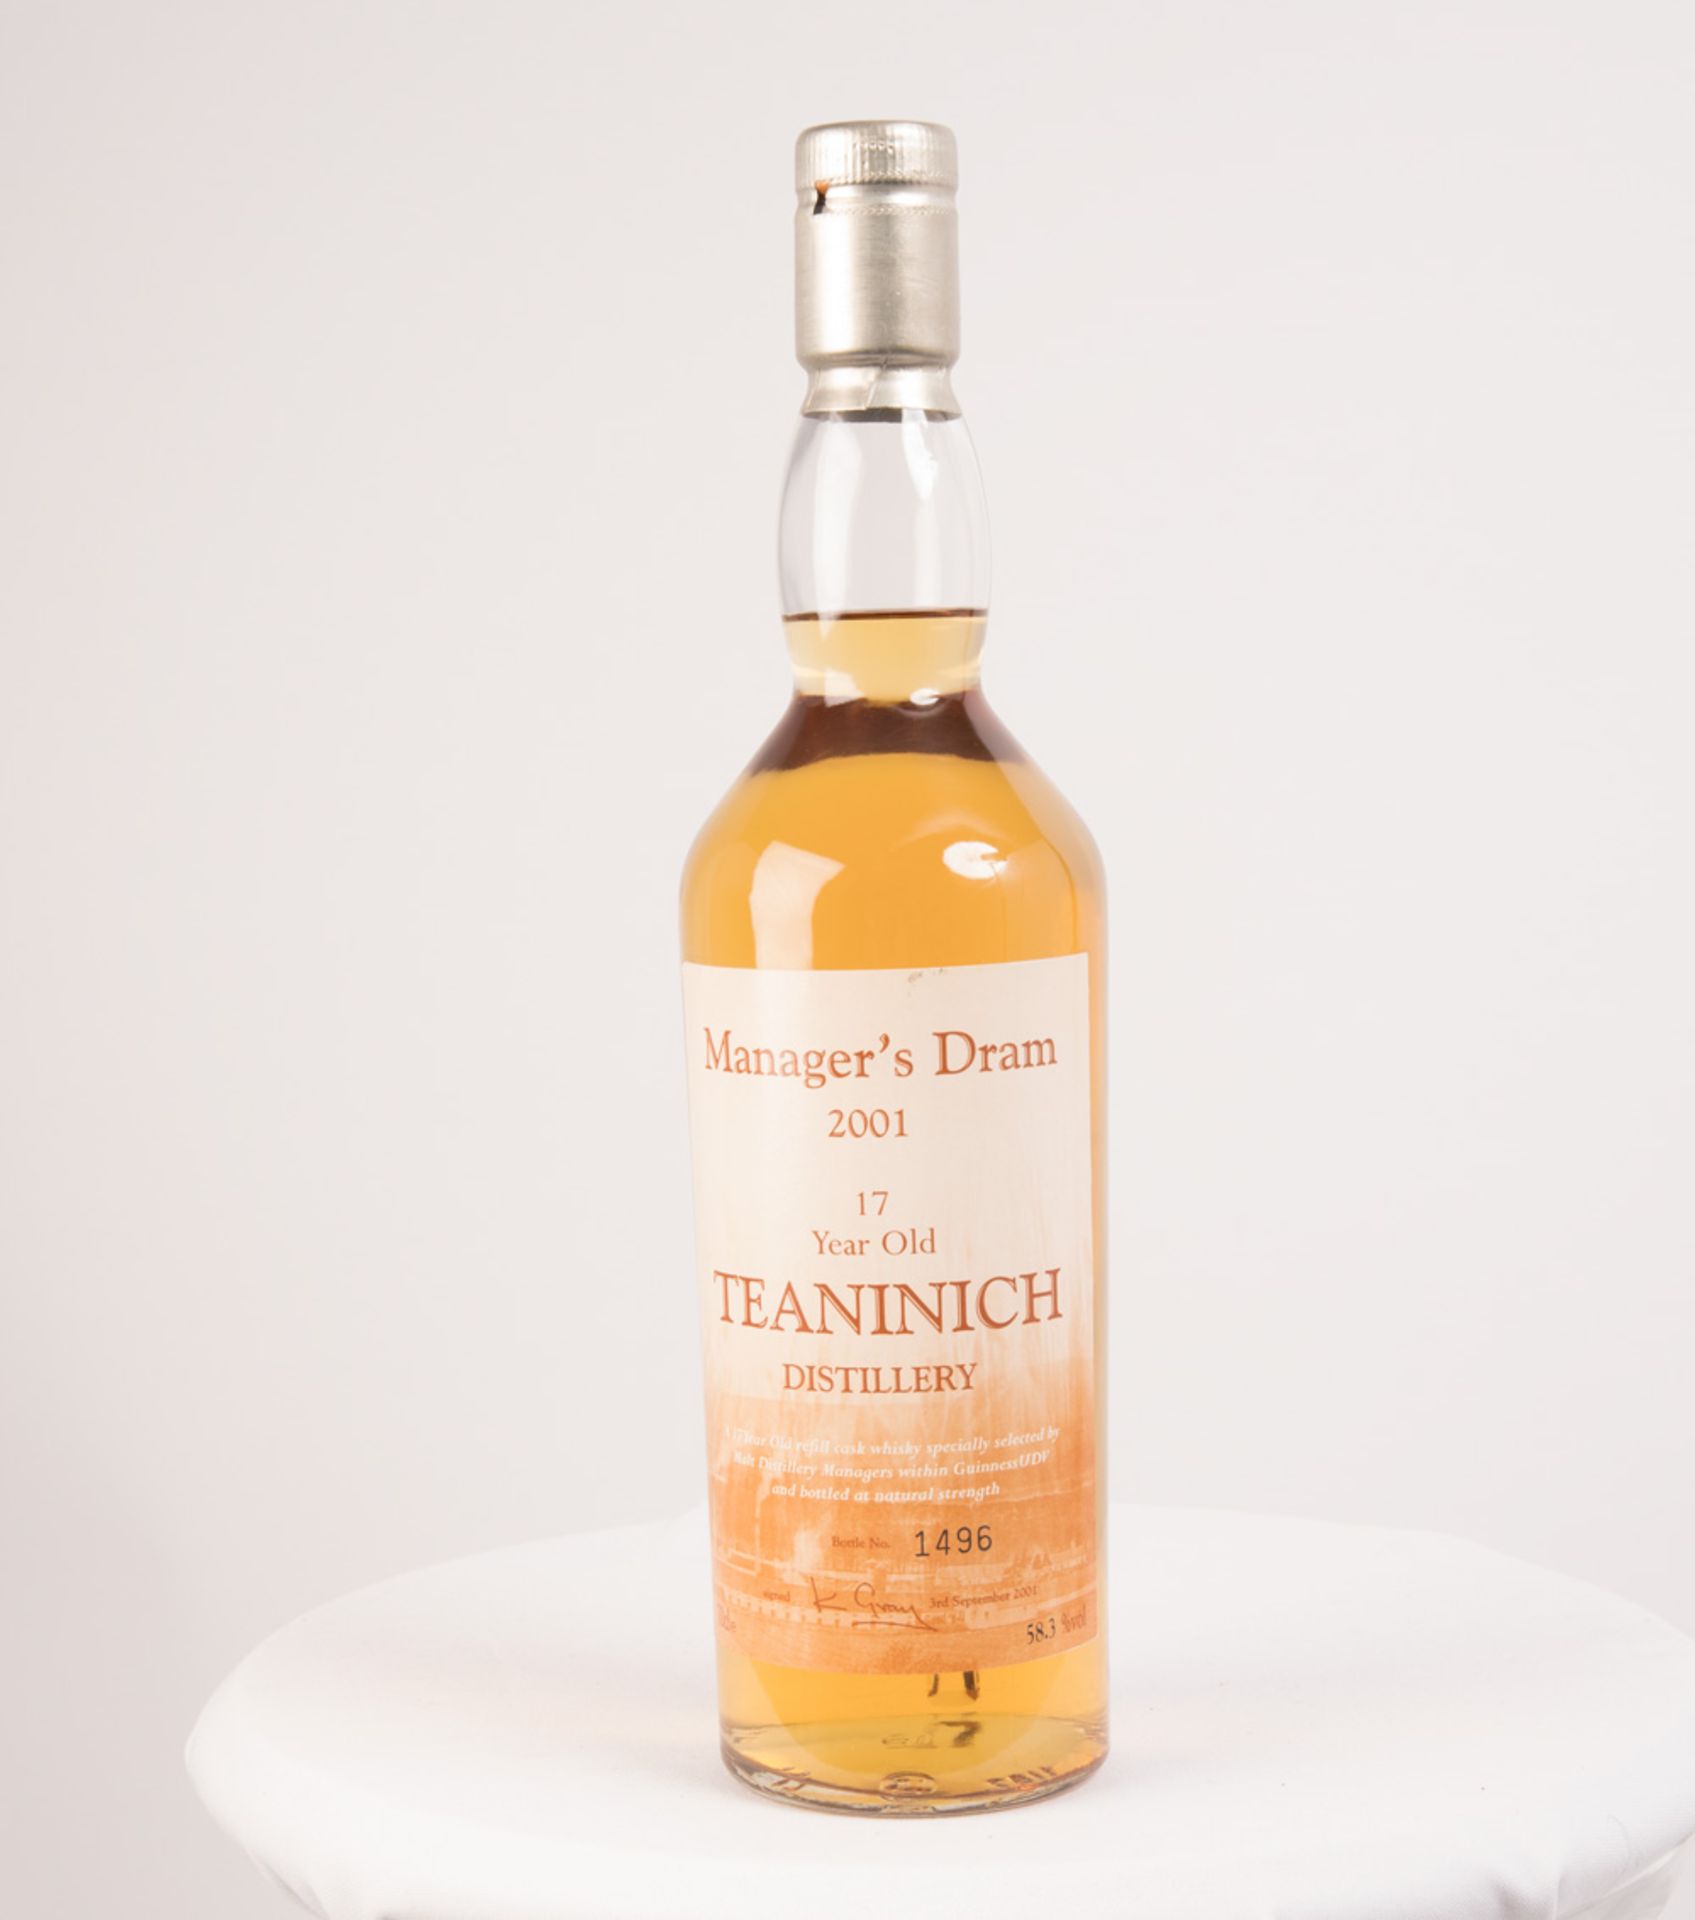 TEANINCH 17 YEAR OLD MANAGER'S DRAM Cask strength single Highland malt Scotch whisky. Specially